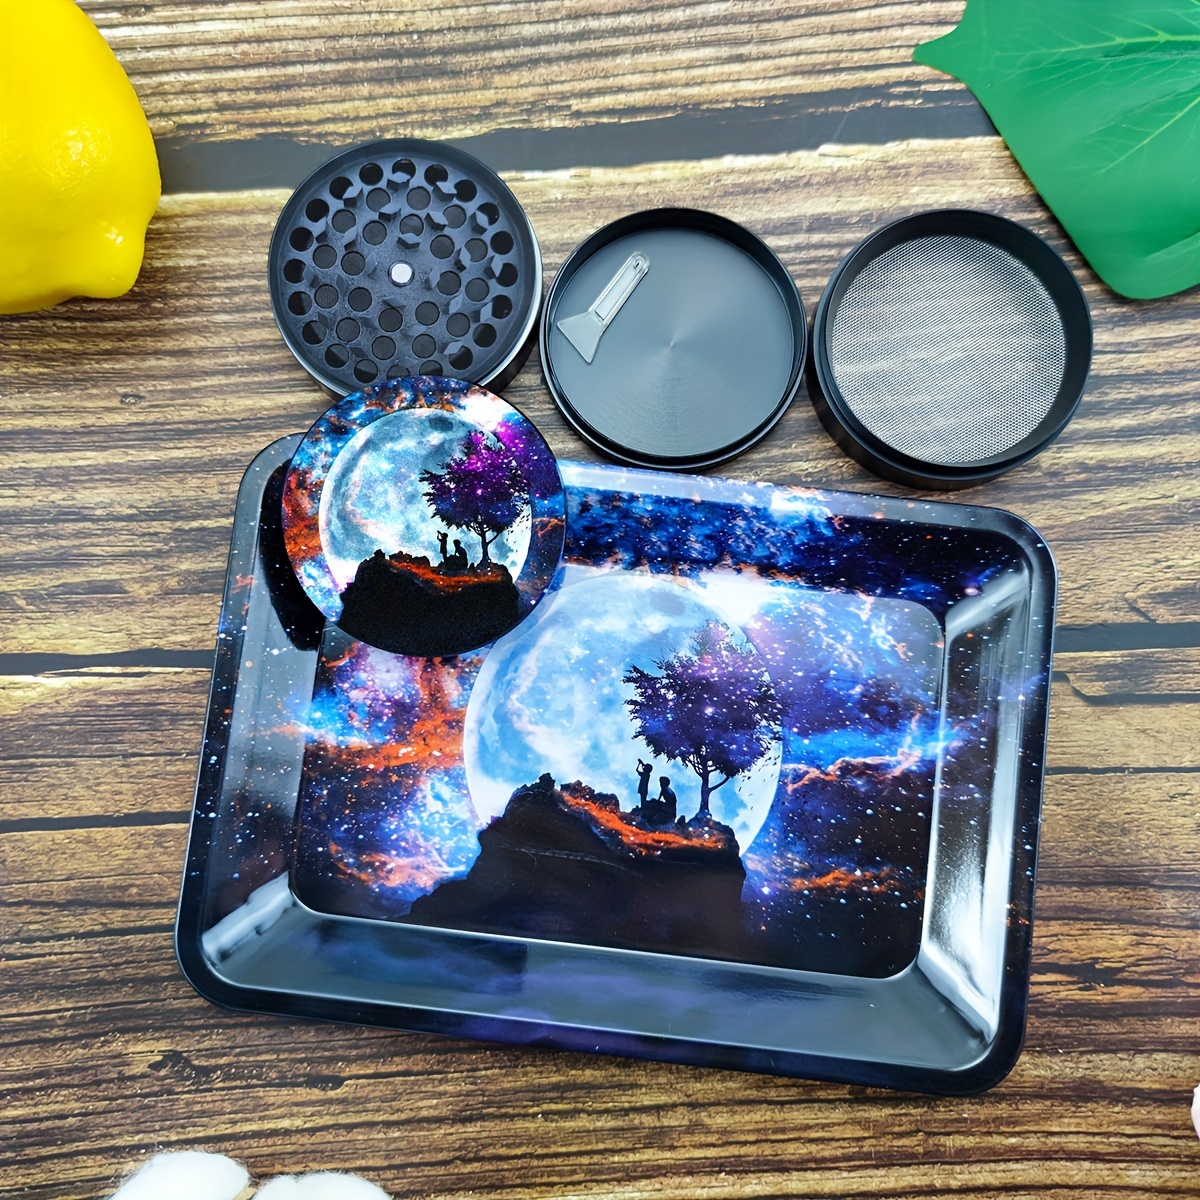 420 Science x Killer Acid Rolling Tray - Slow Your Roll / $ 14.99